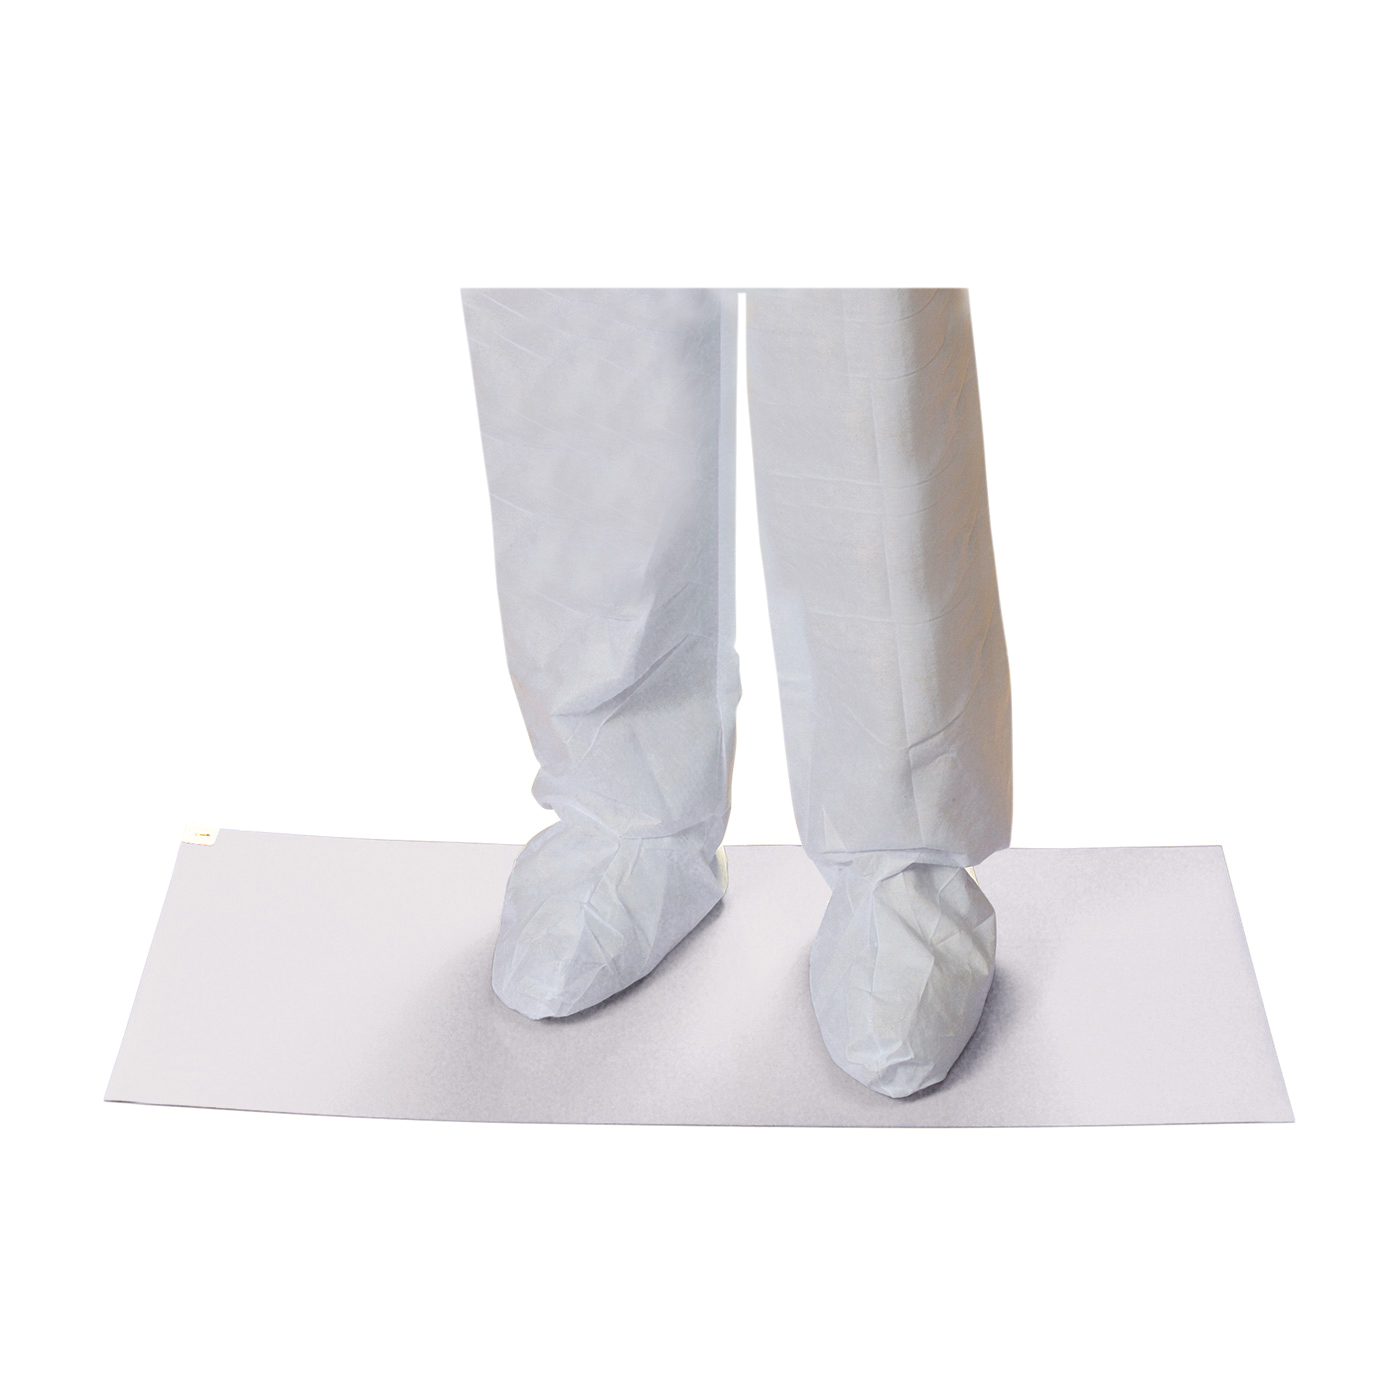 PIP® CleanTeam® 100-93-364538W Contamination Control Clean Room Mat, 45 in L x 36 in W x 0.05 mm THK, White, Polyethelene, 30 Sheets per Mat